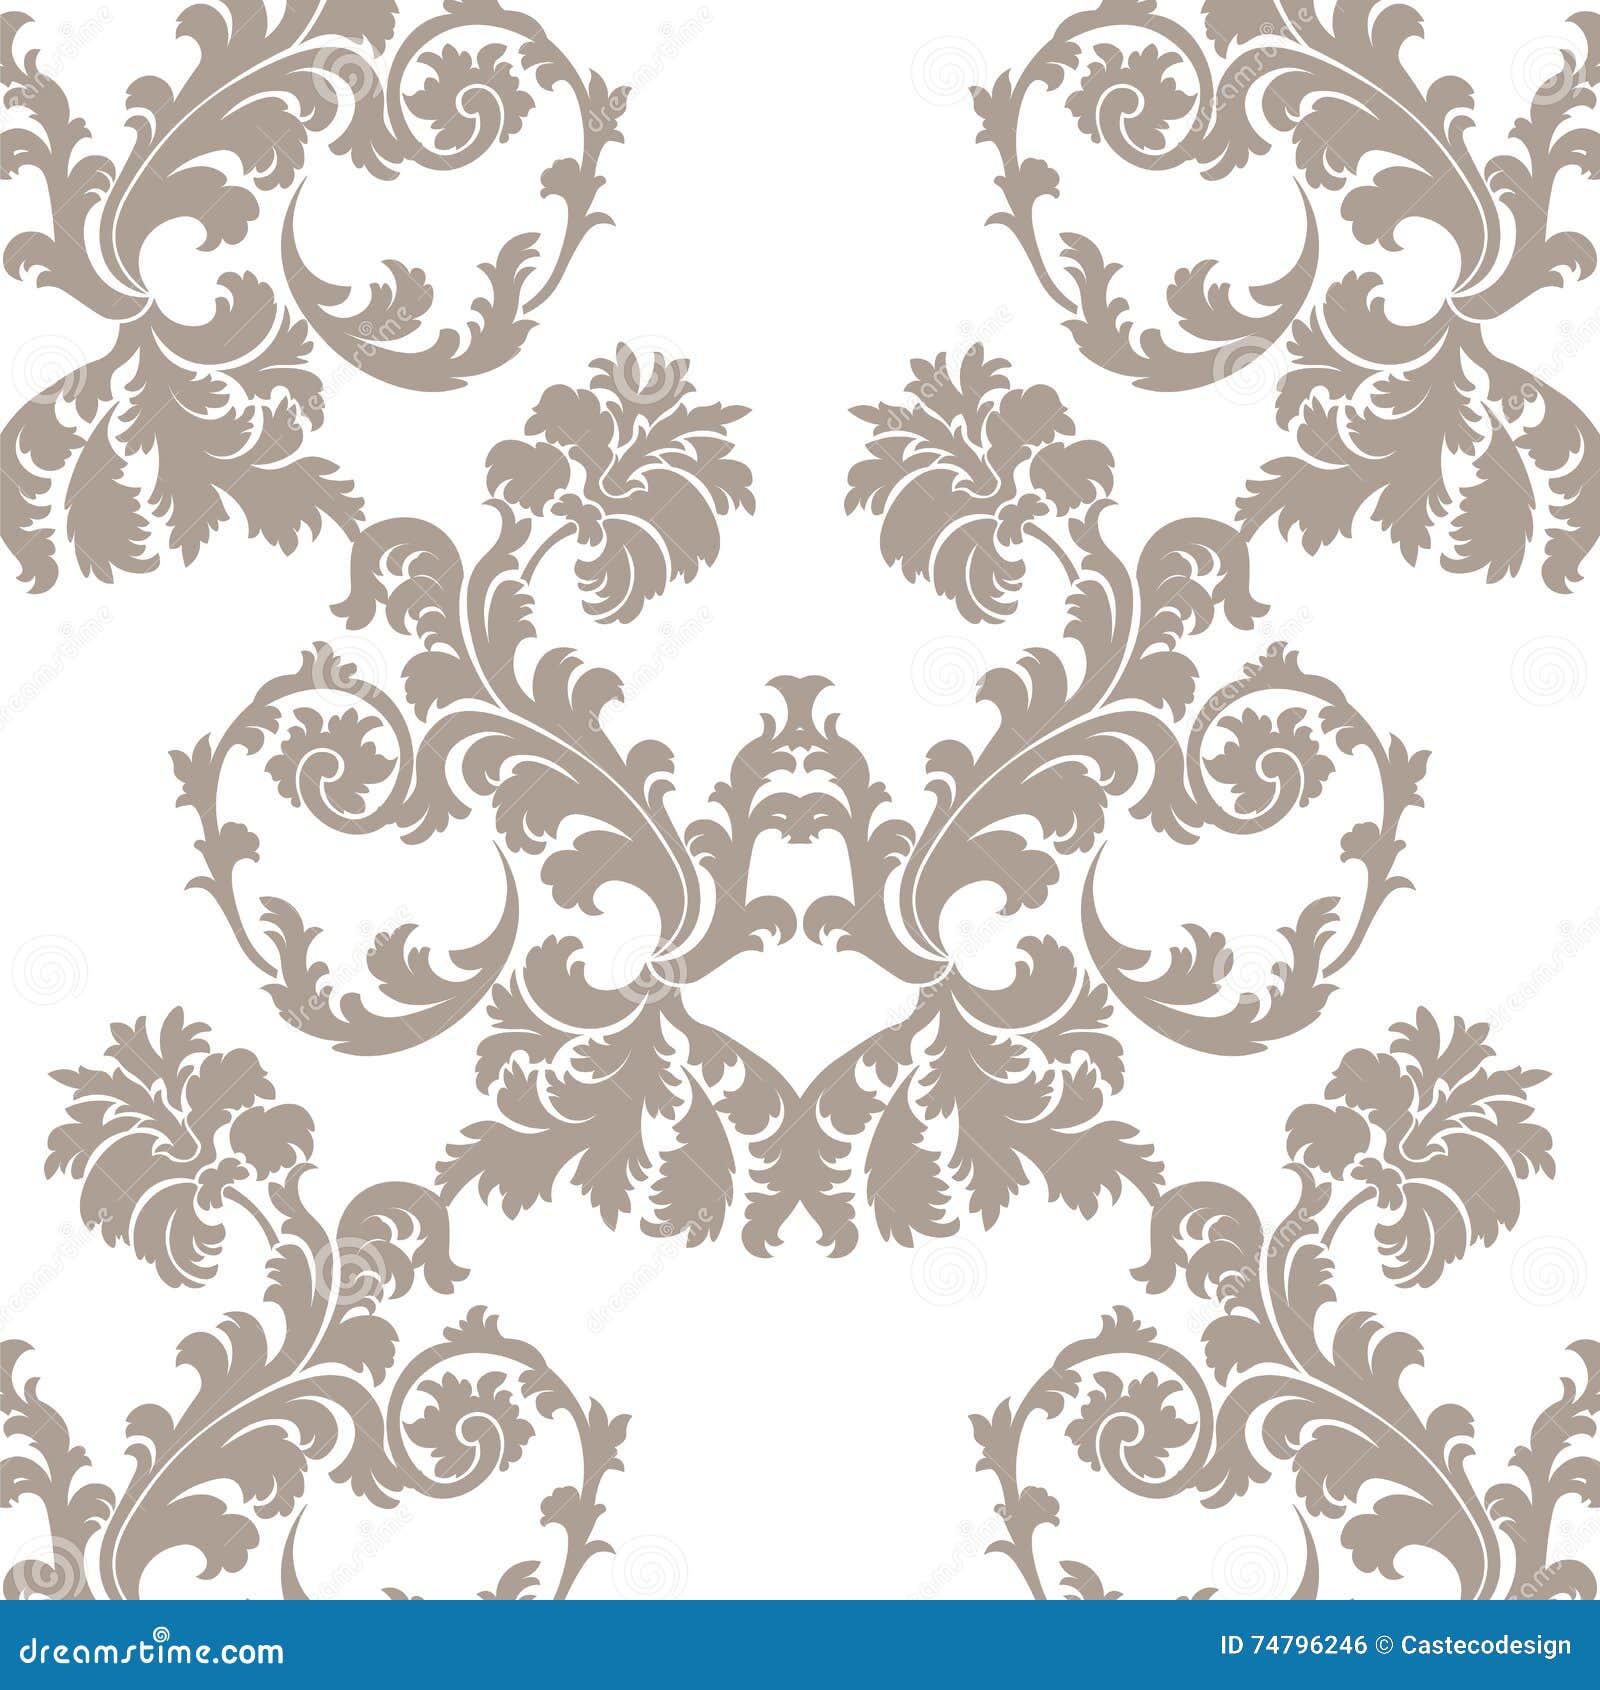 Download Vector Baroque Floral Damask Ornament Pattern Stock Vector ...